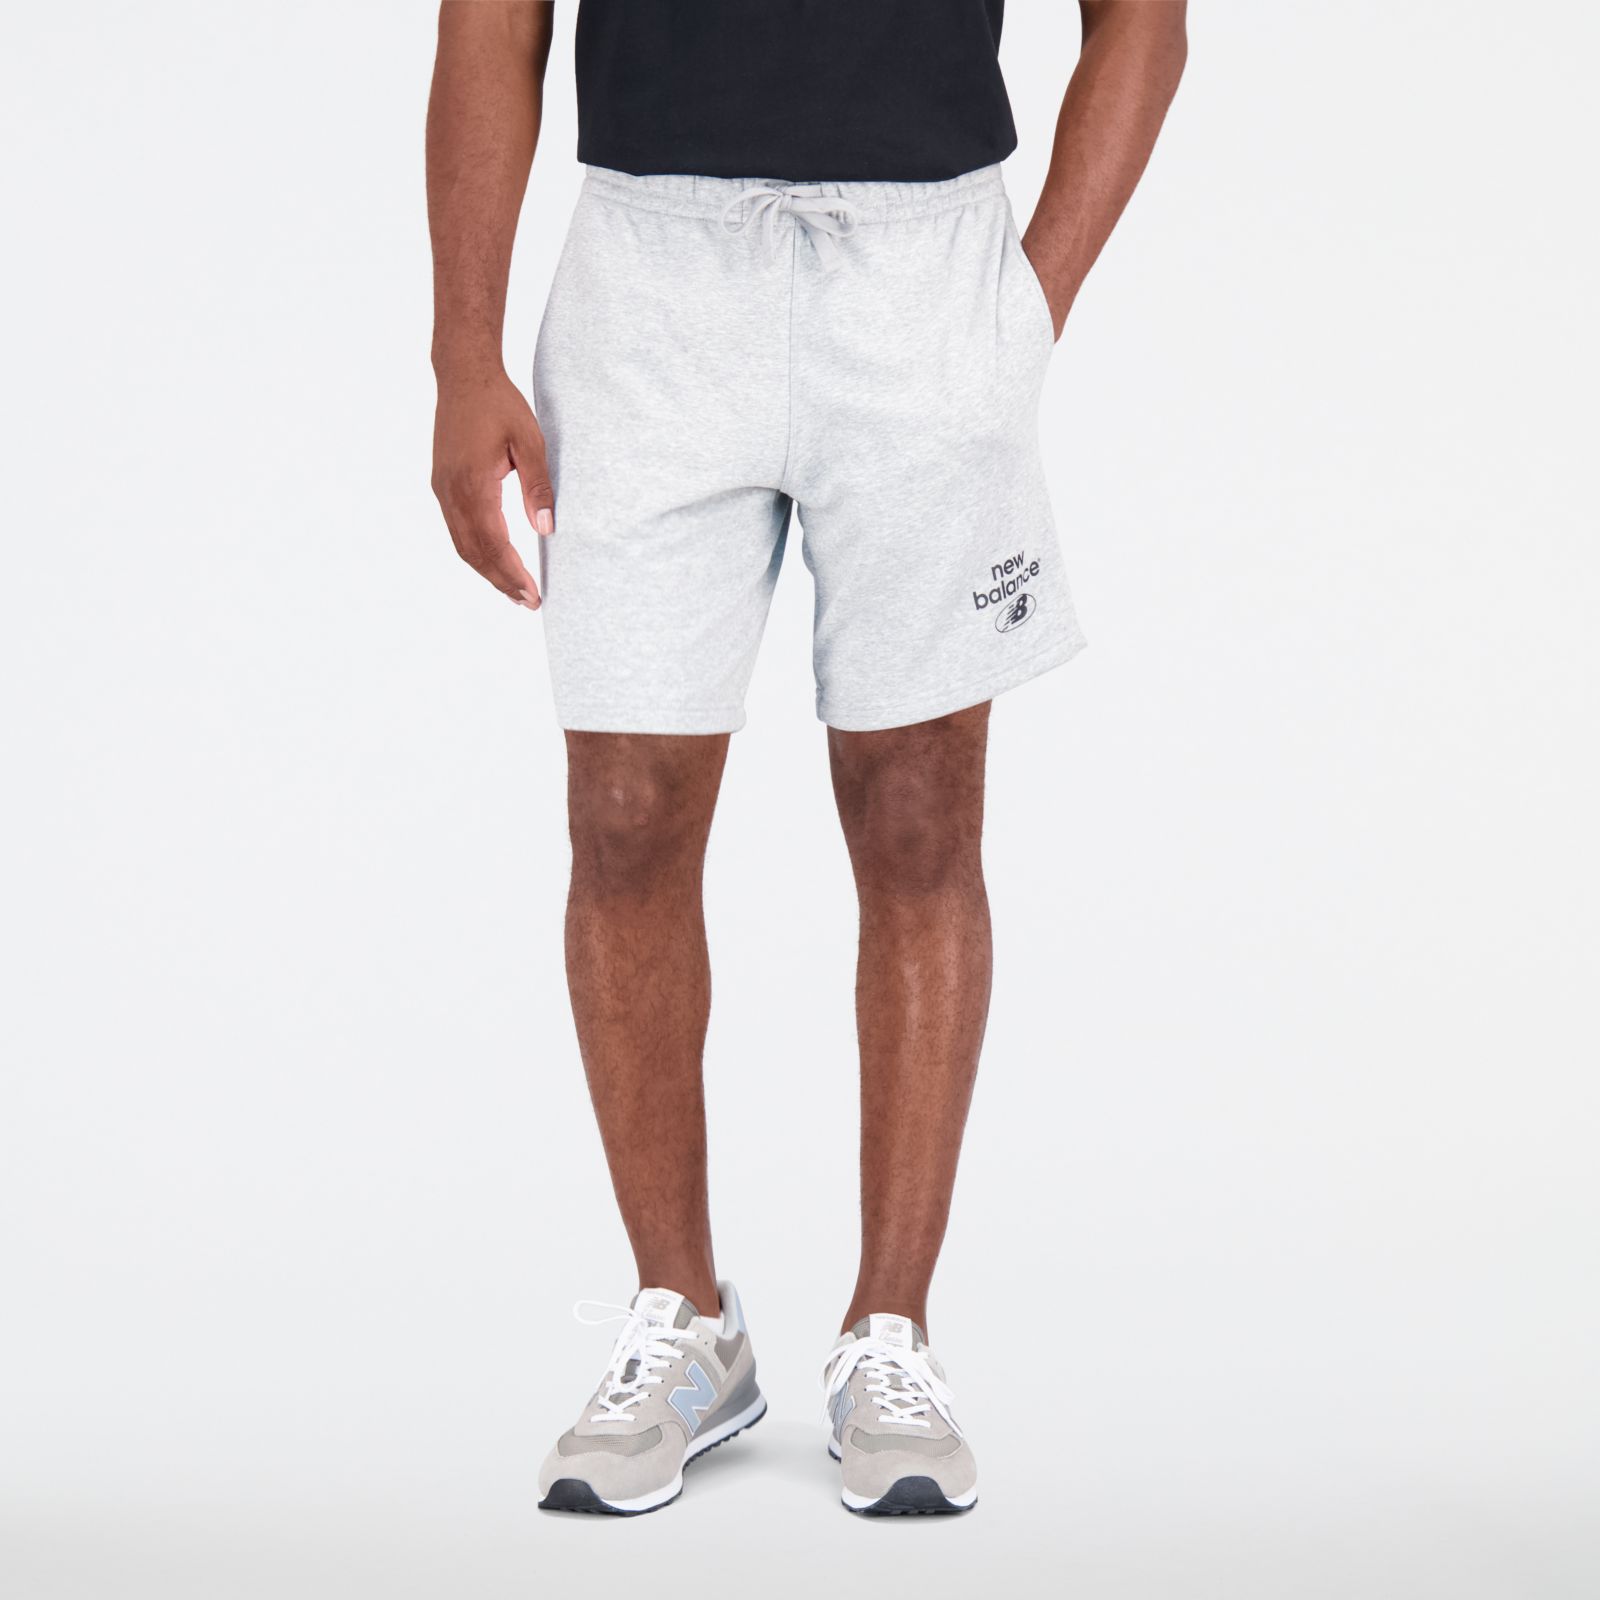 Men's Essentials Reimagined French Terry Short Apparel - New Balance